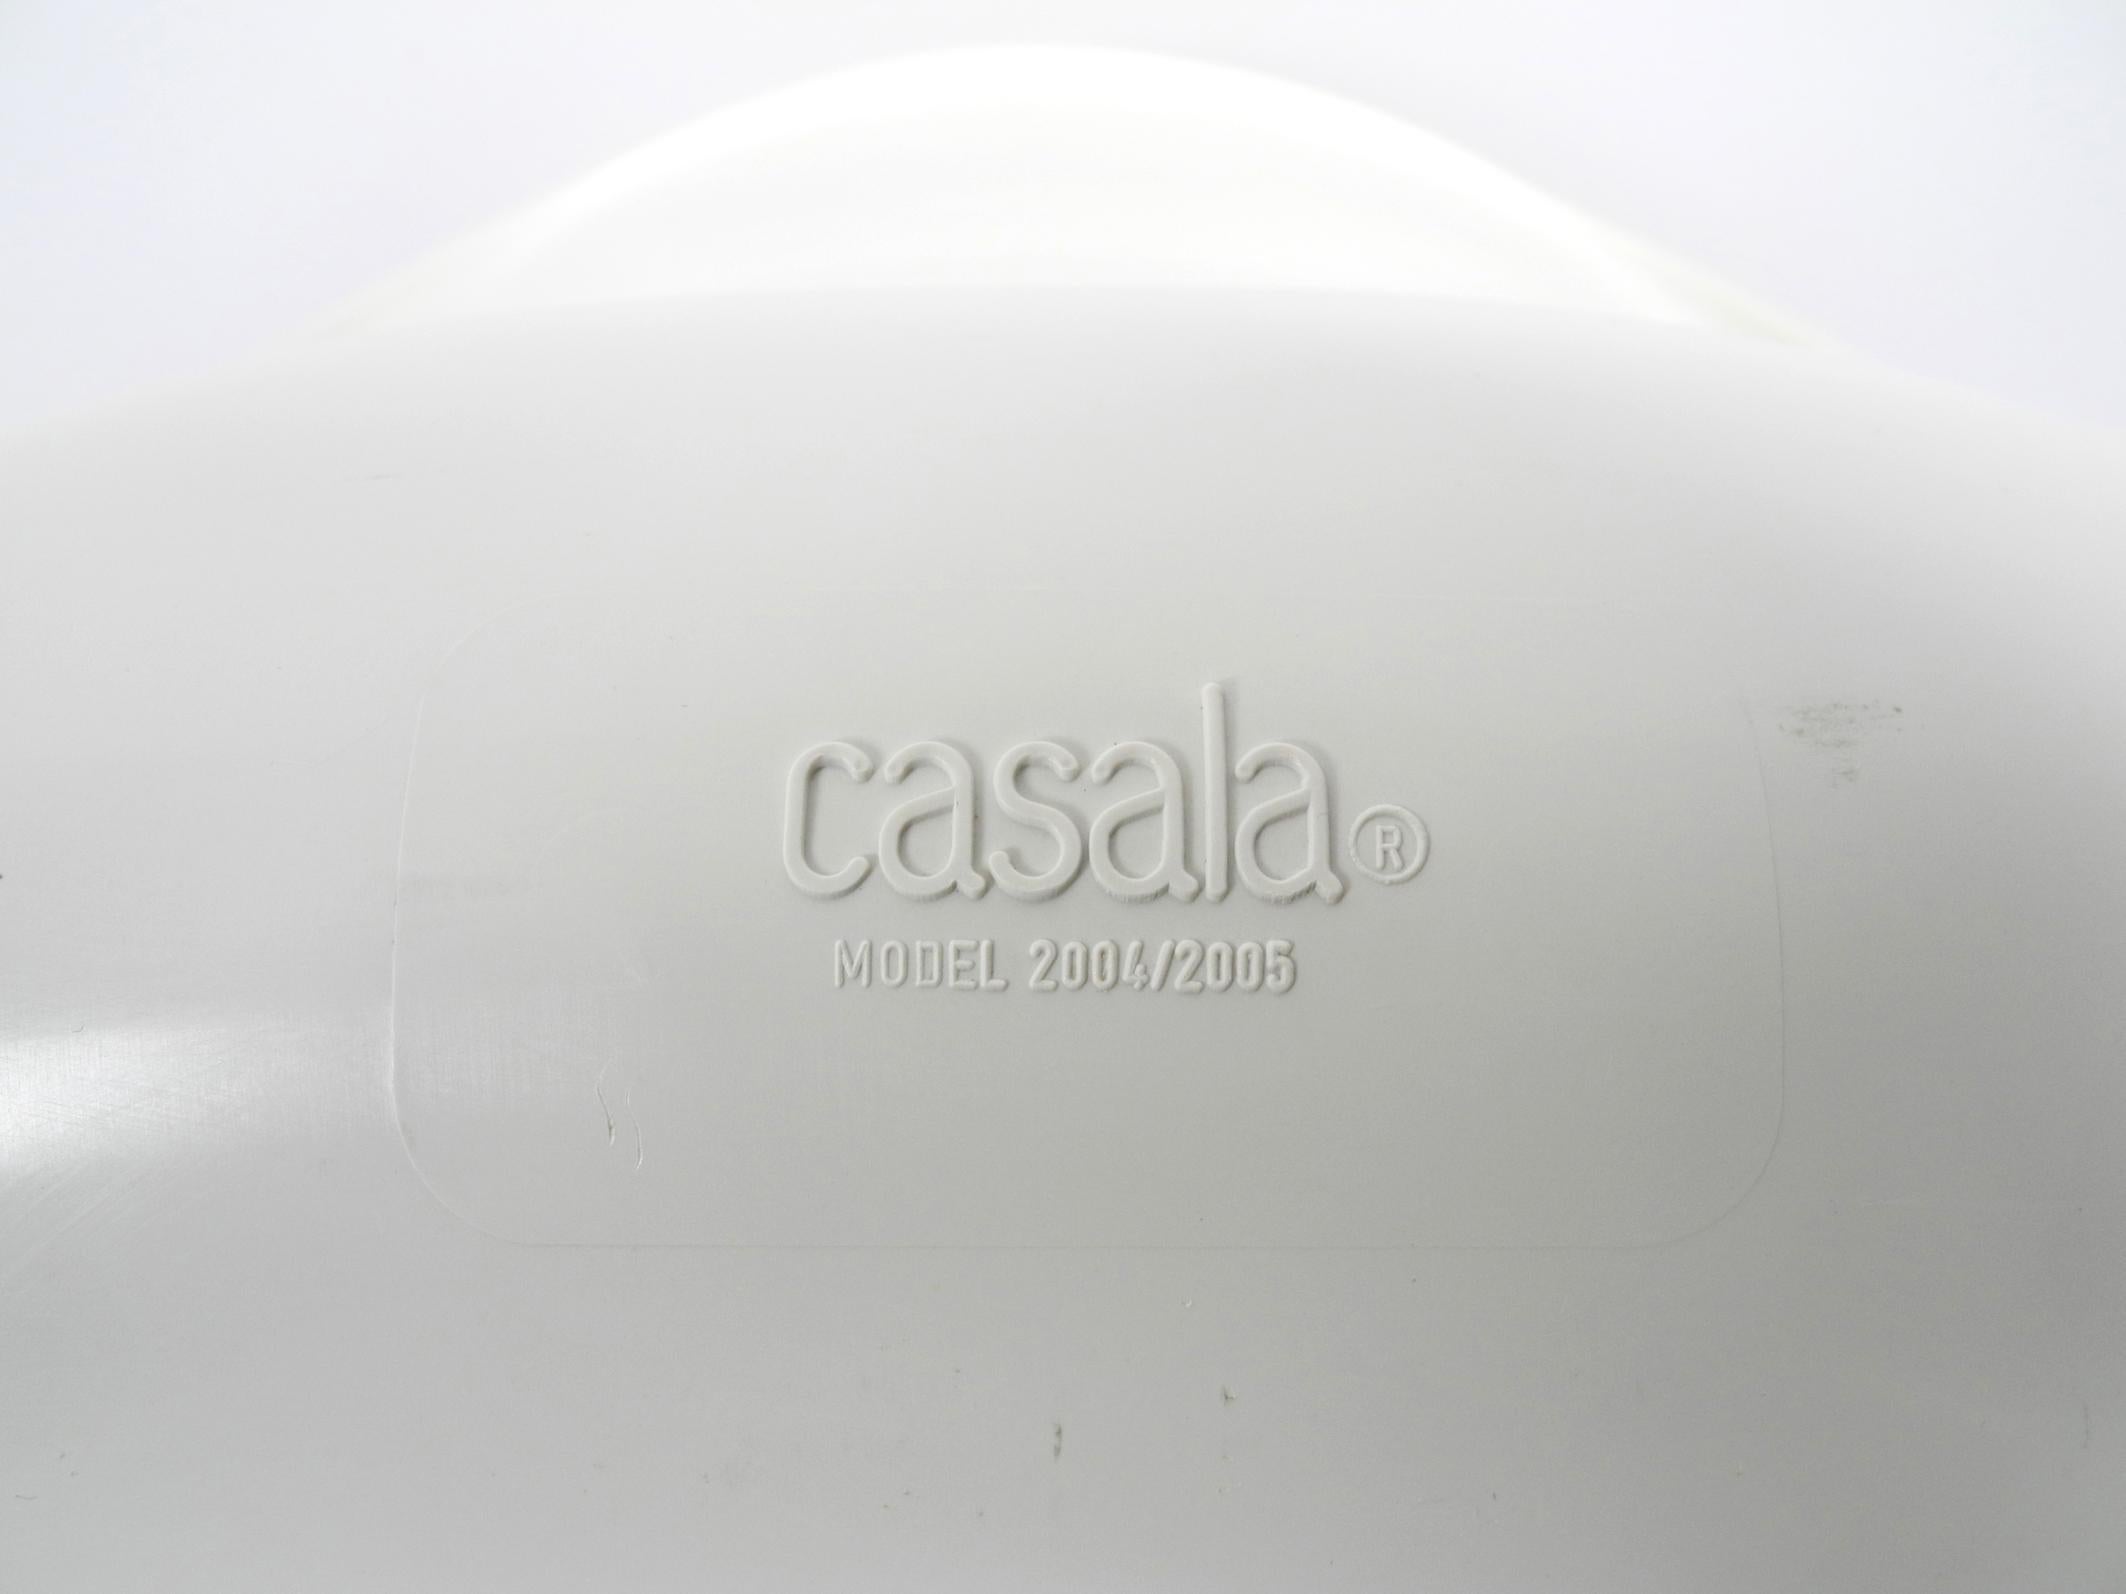 Plastic Three Original Casalino Chairs from Casala Model 2004/2005 from 1973 and 1980